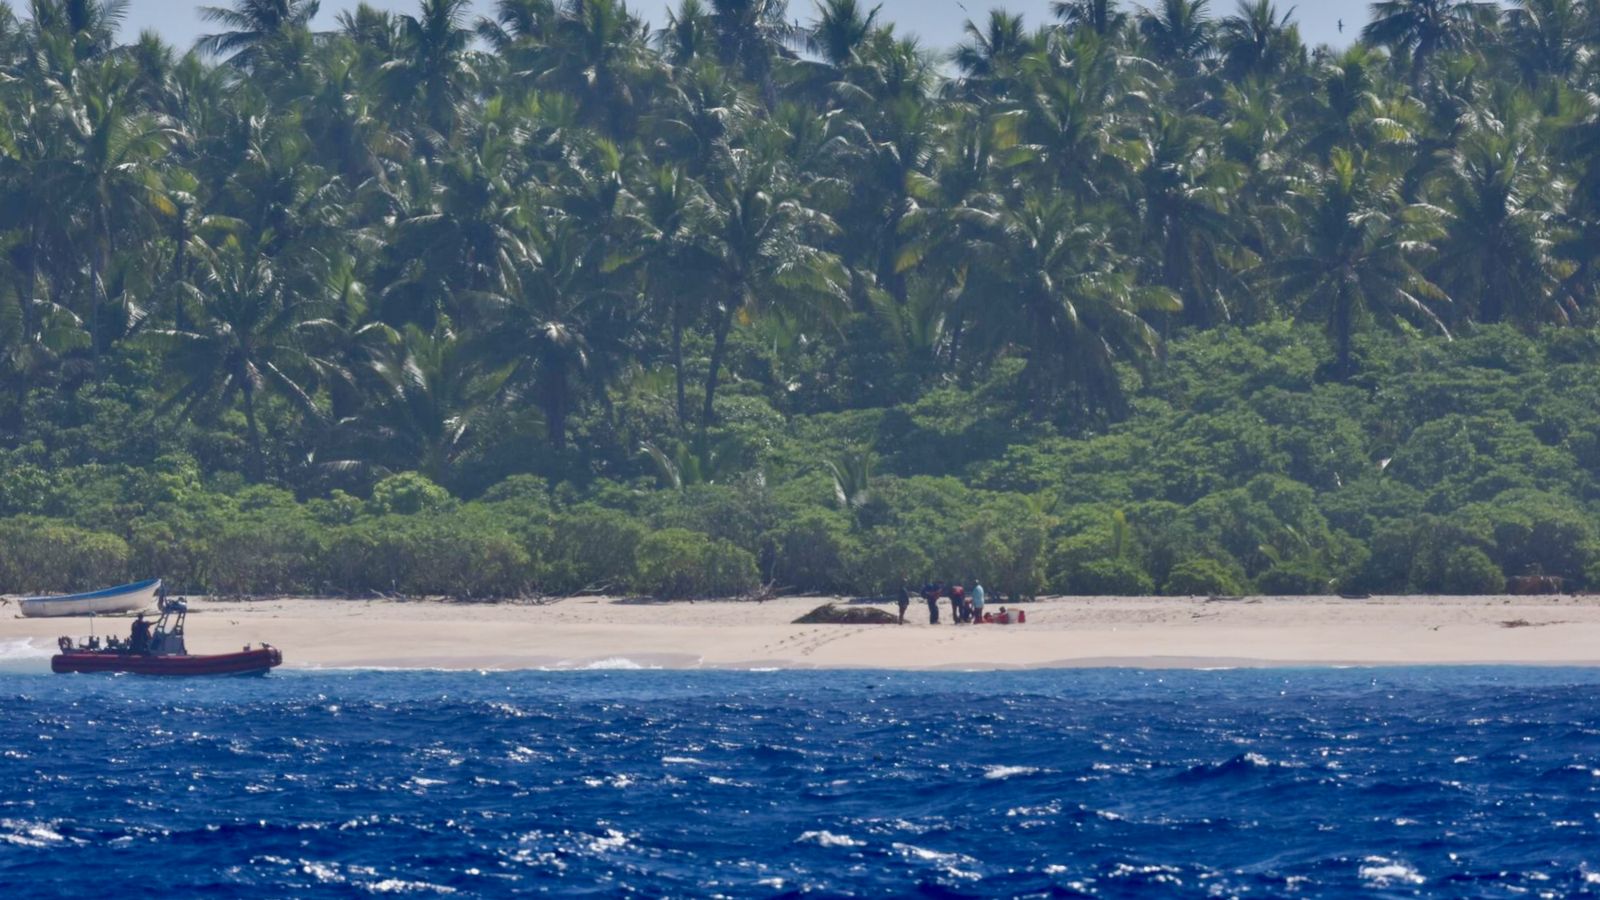 stranded sailors rescued from remote island after spelling 'help' with palm tree leaves